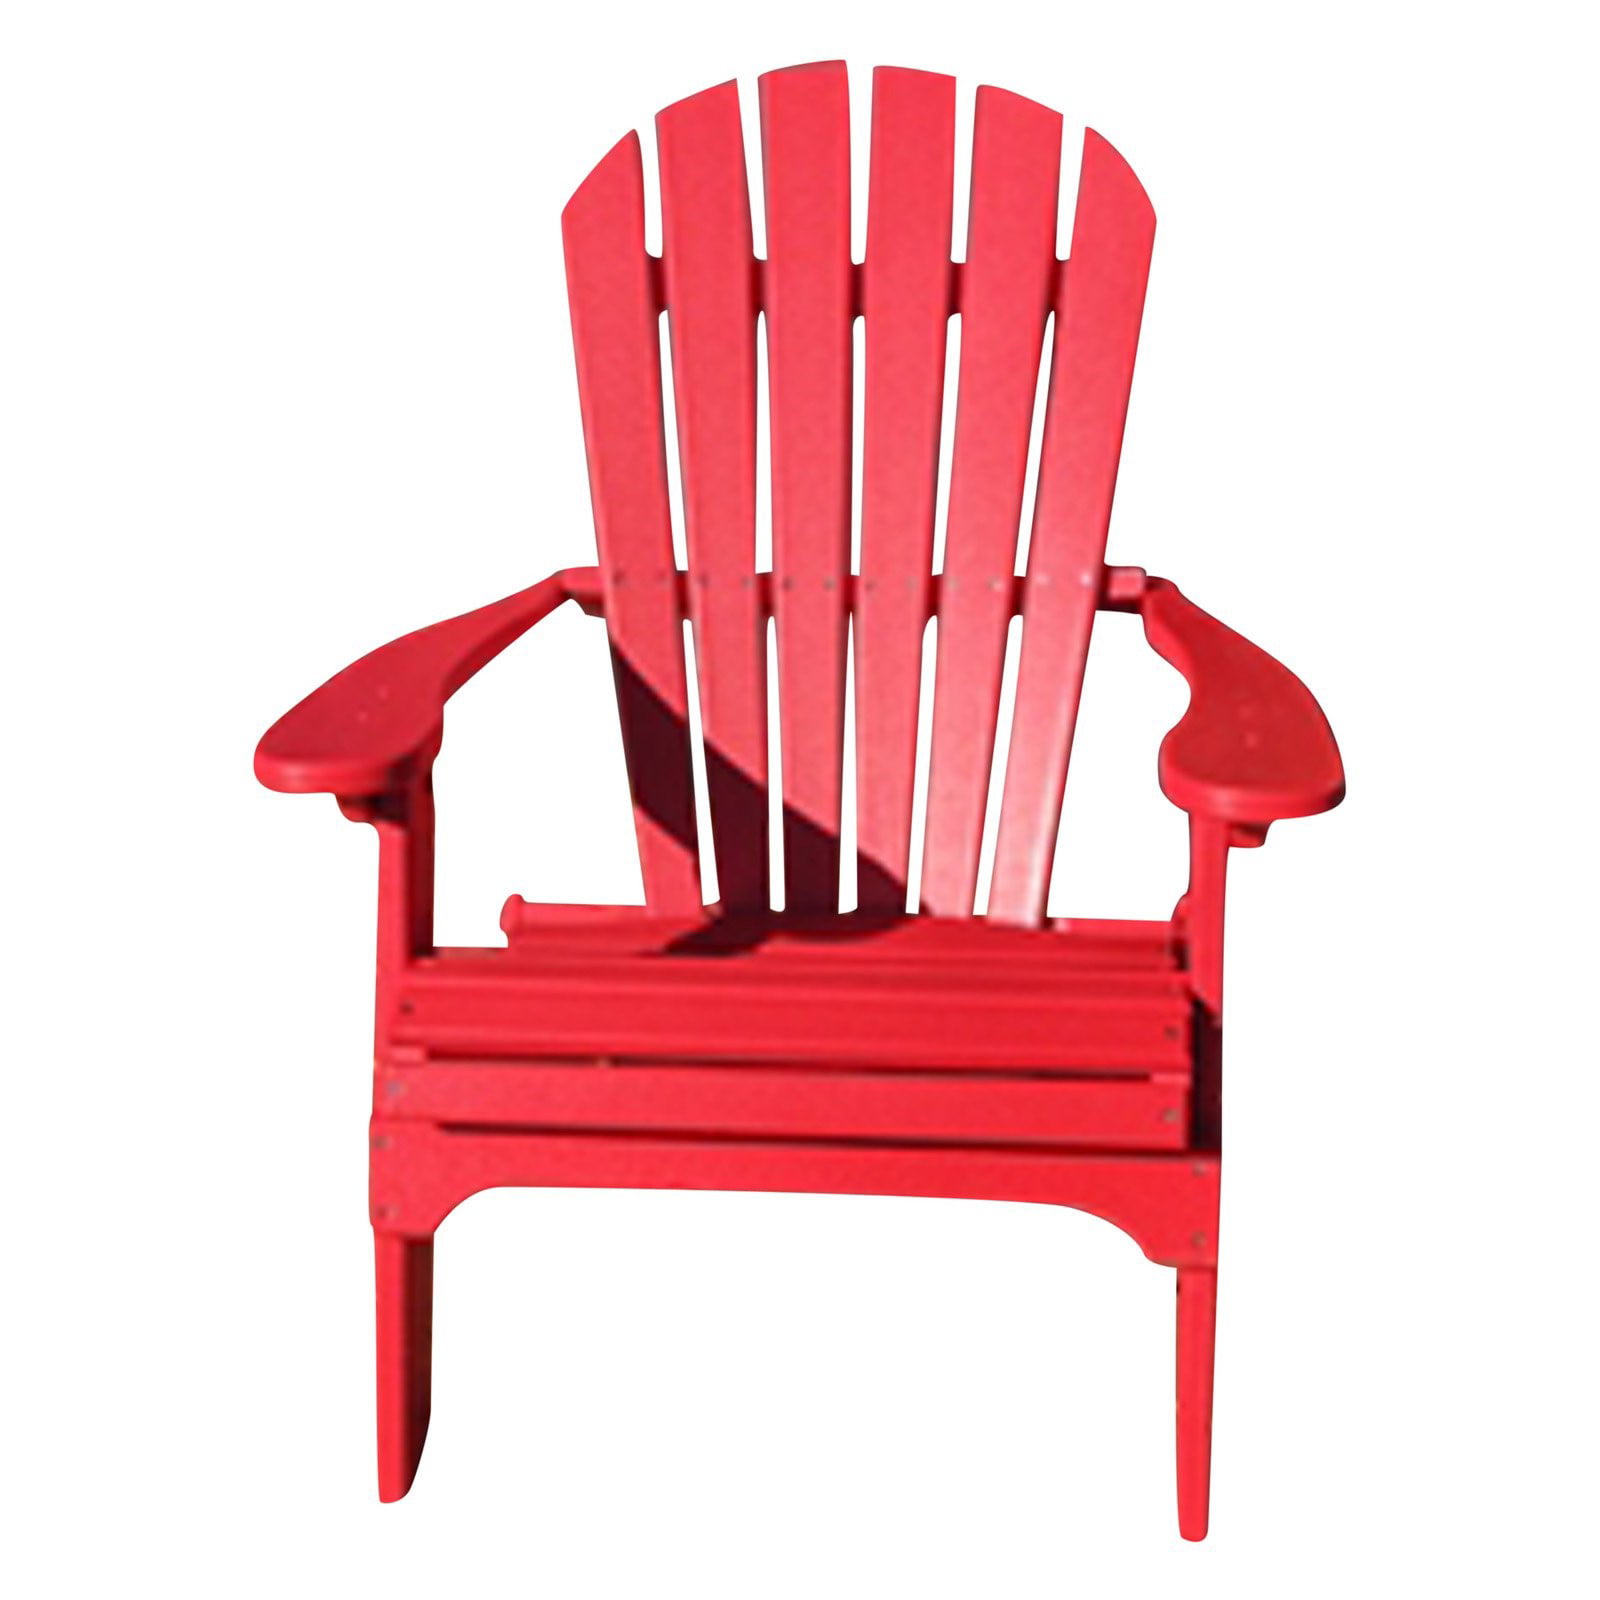 Phat Tommy Recycled Plastic Folding Adirondack Chair